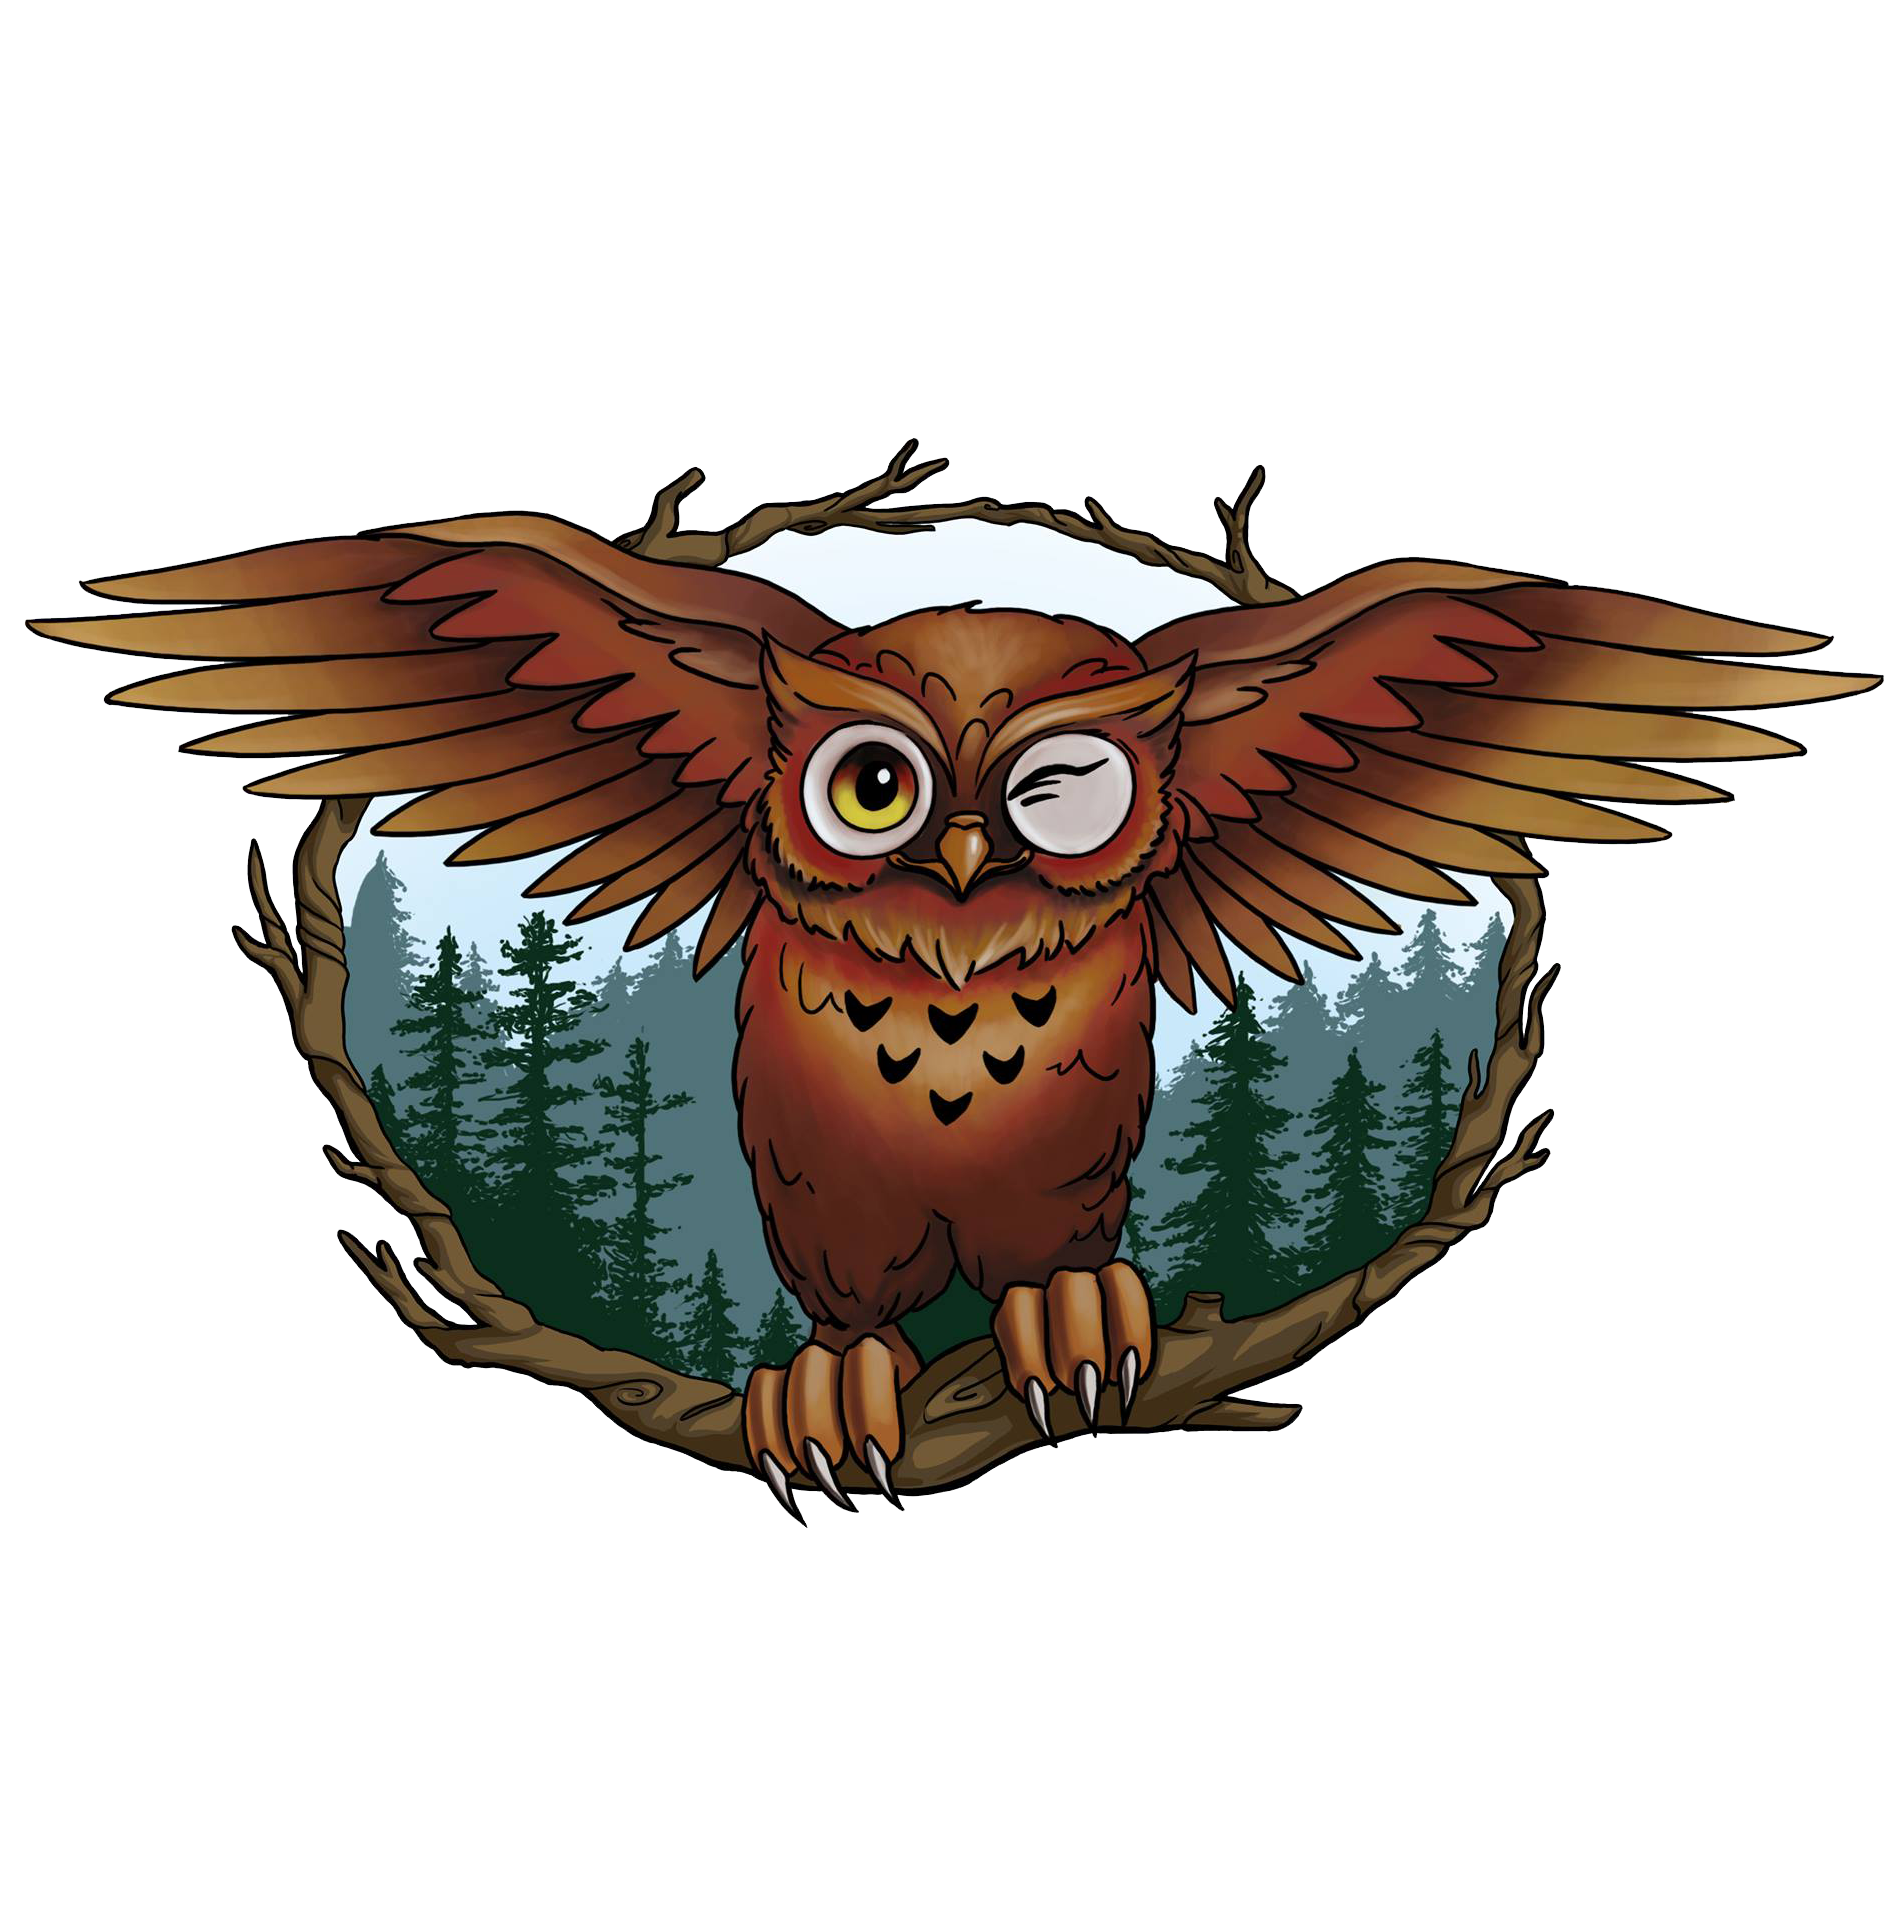 Event Partner, The Brown Owl